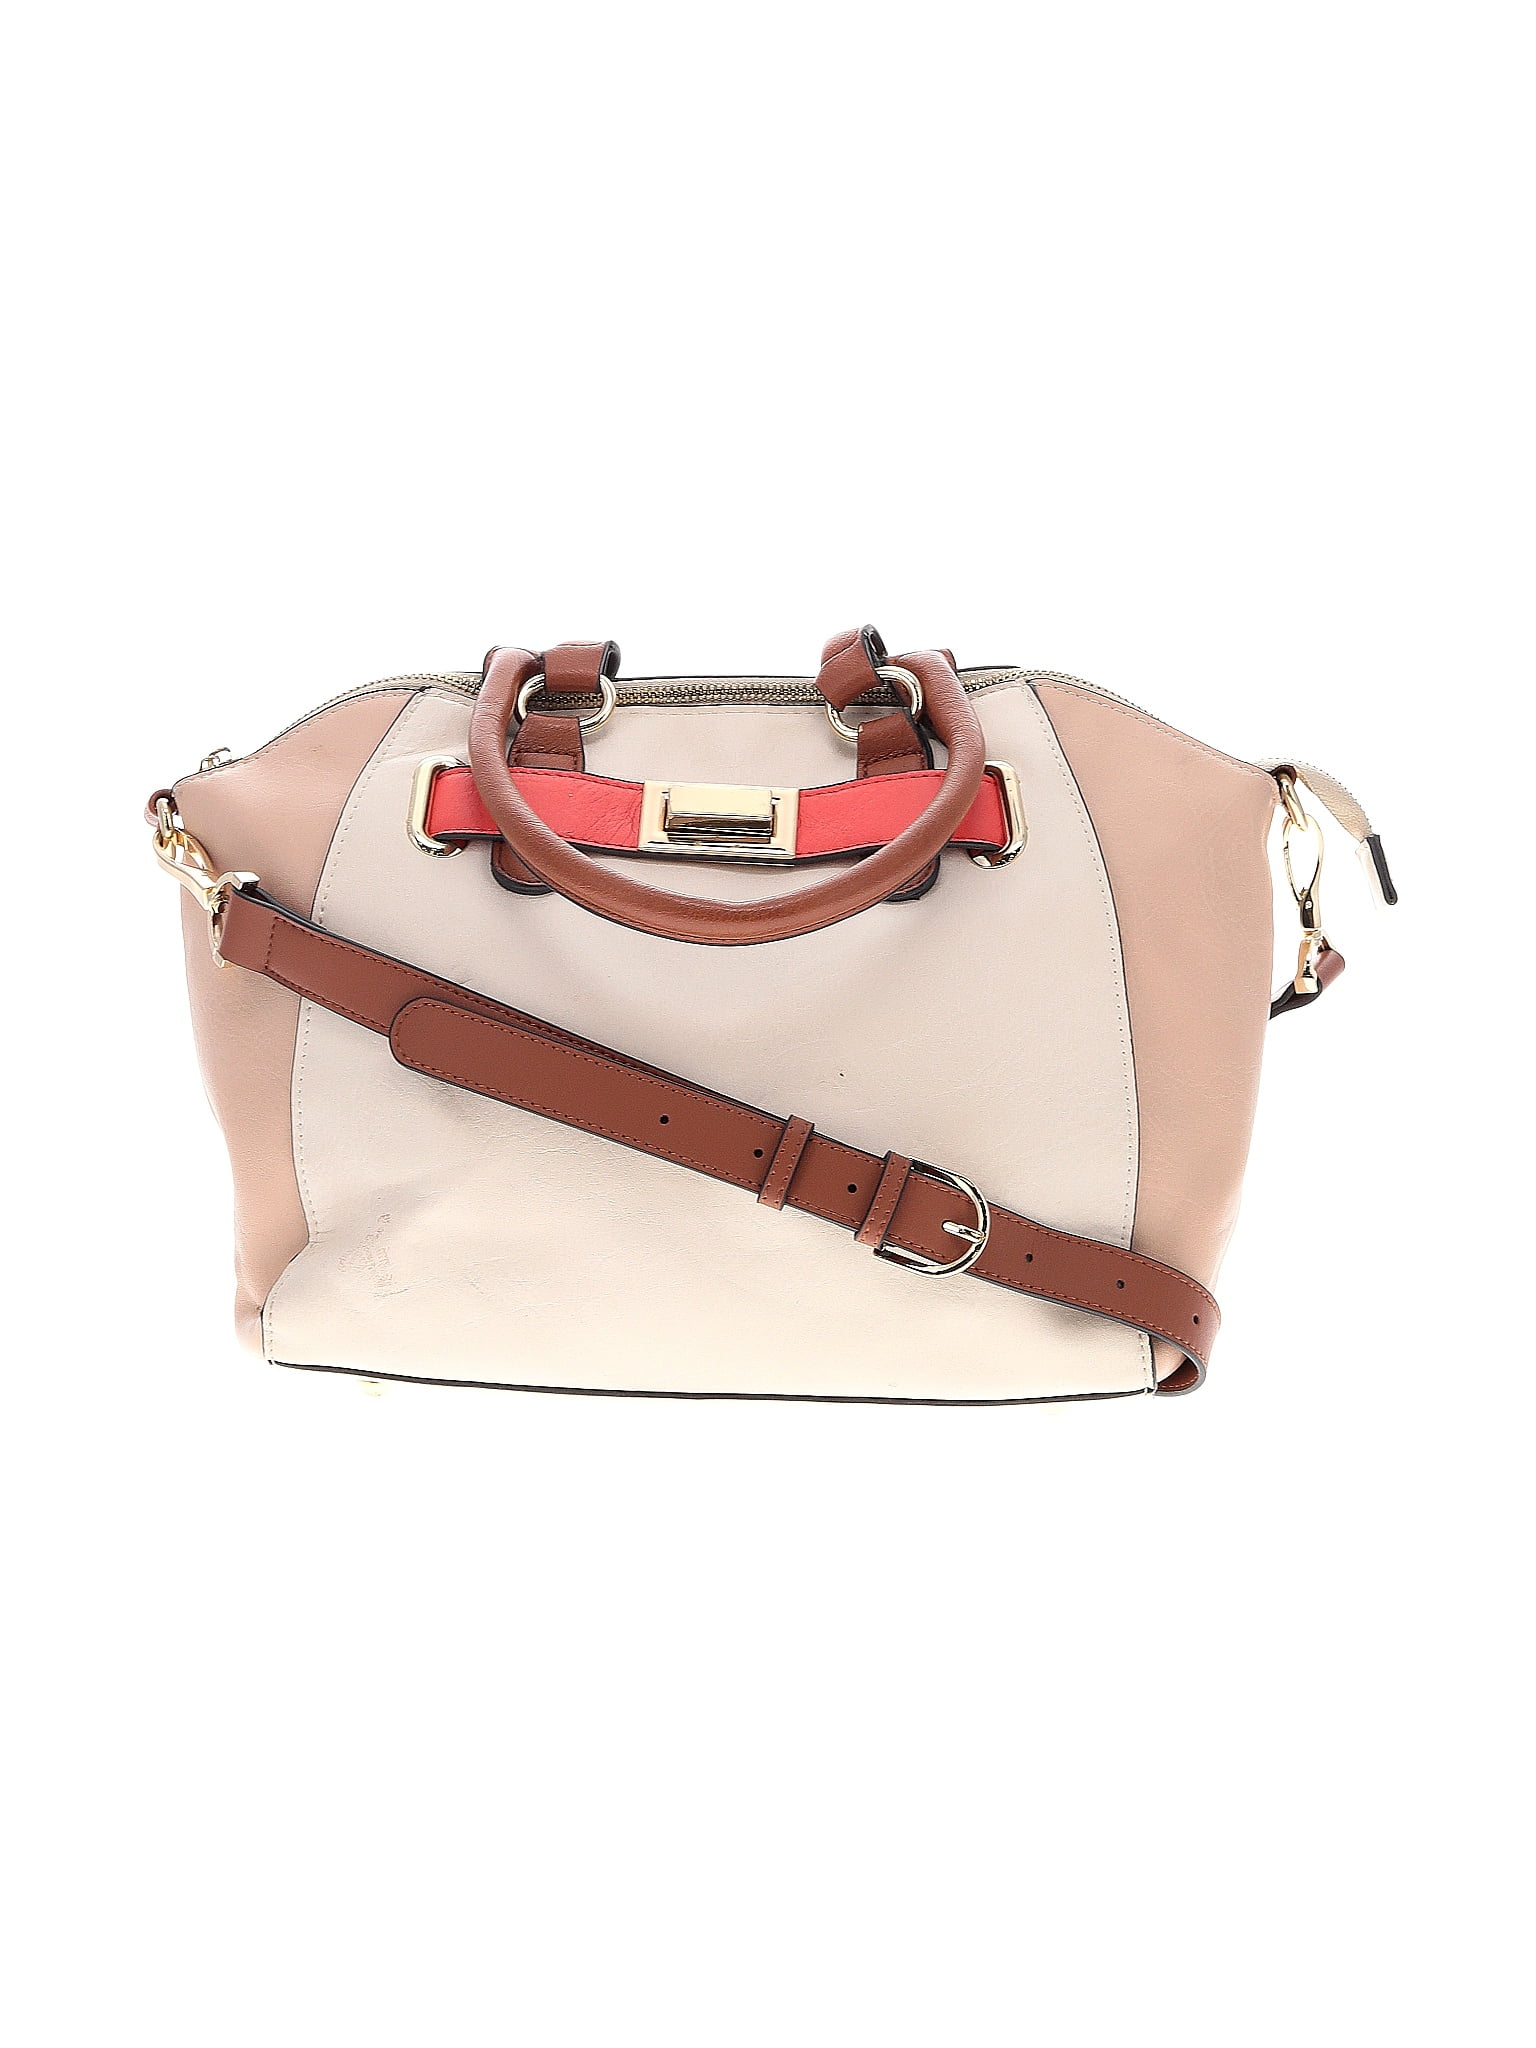 Buy Call It Spring Syd Shoulder Bag Online | ZALORA Malaysia